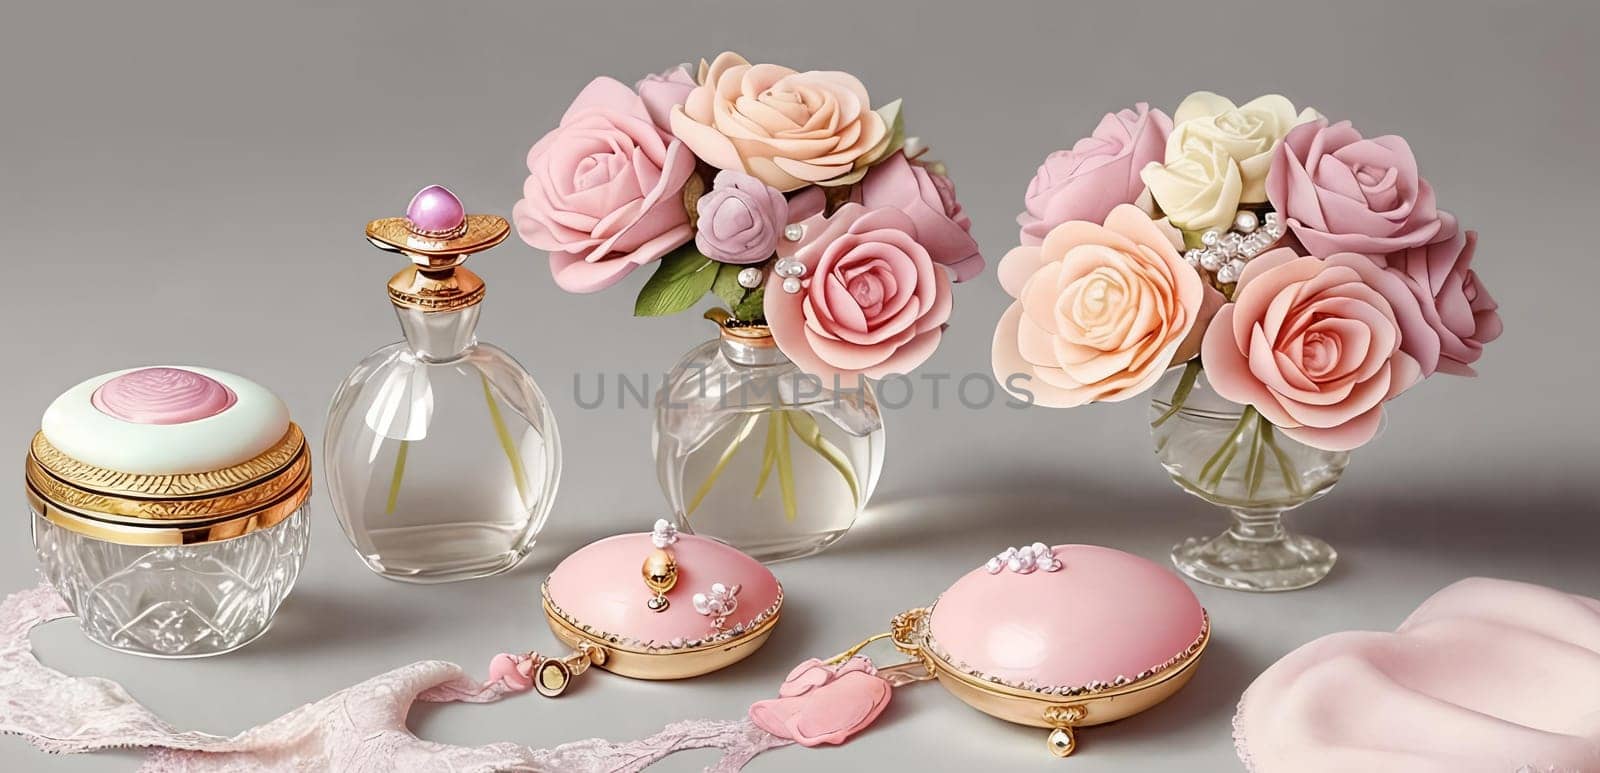 Pastel Palette. A still life scene featuring pastel-colored feminine accessories like a delicate pearl necklace by GoodOlga